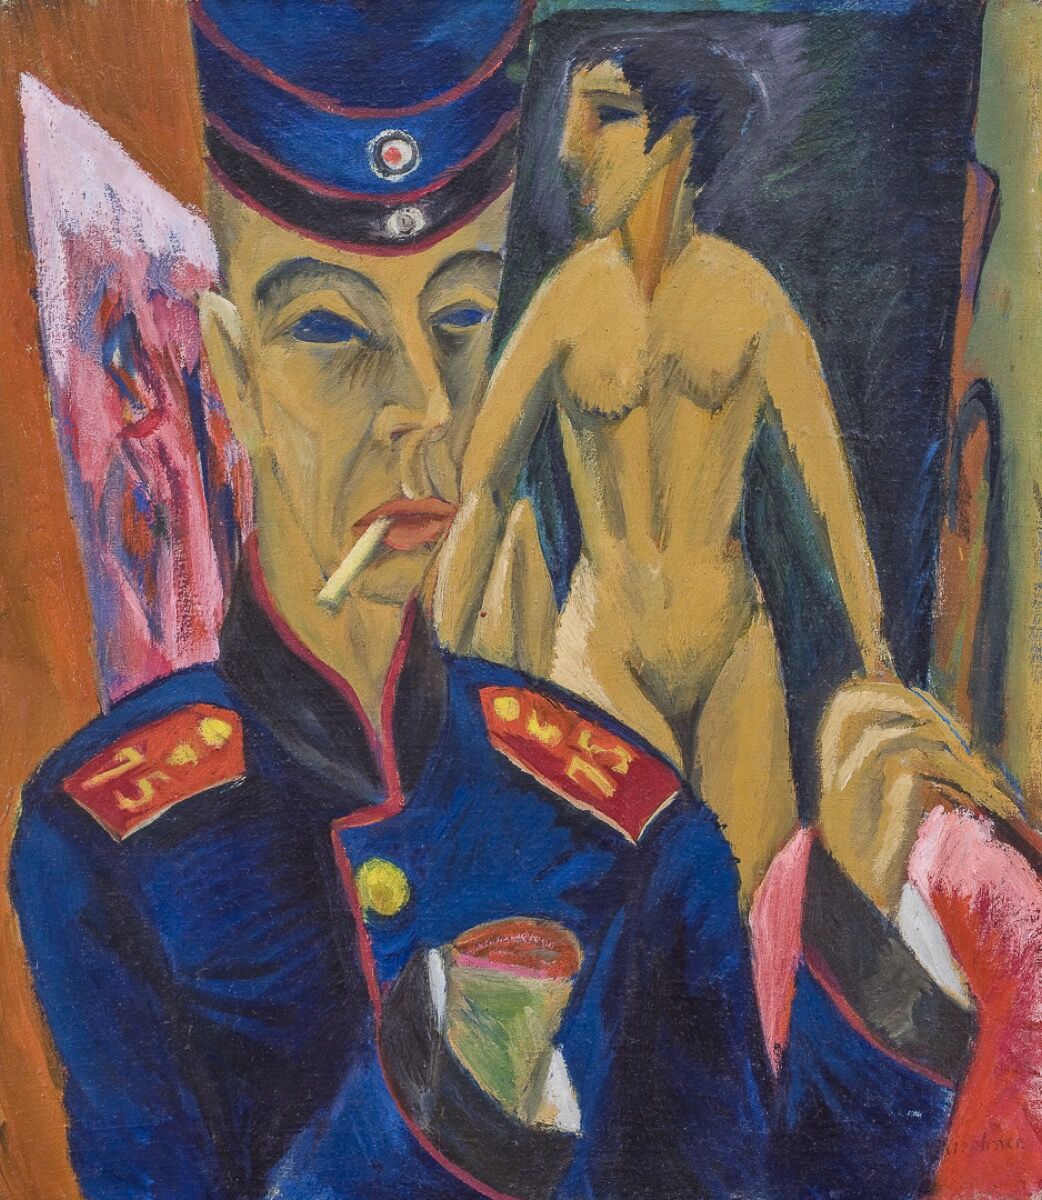 Ernst Ludwig Kirchner, Self-Portrait as a Soldier, 1915. Courtesy of the Allen Memorial Art Museum, Oberlin College.